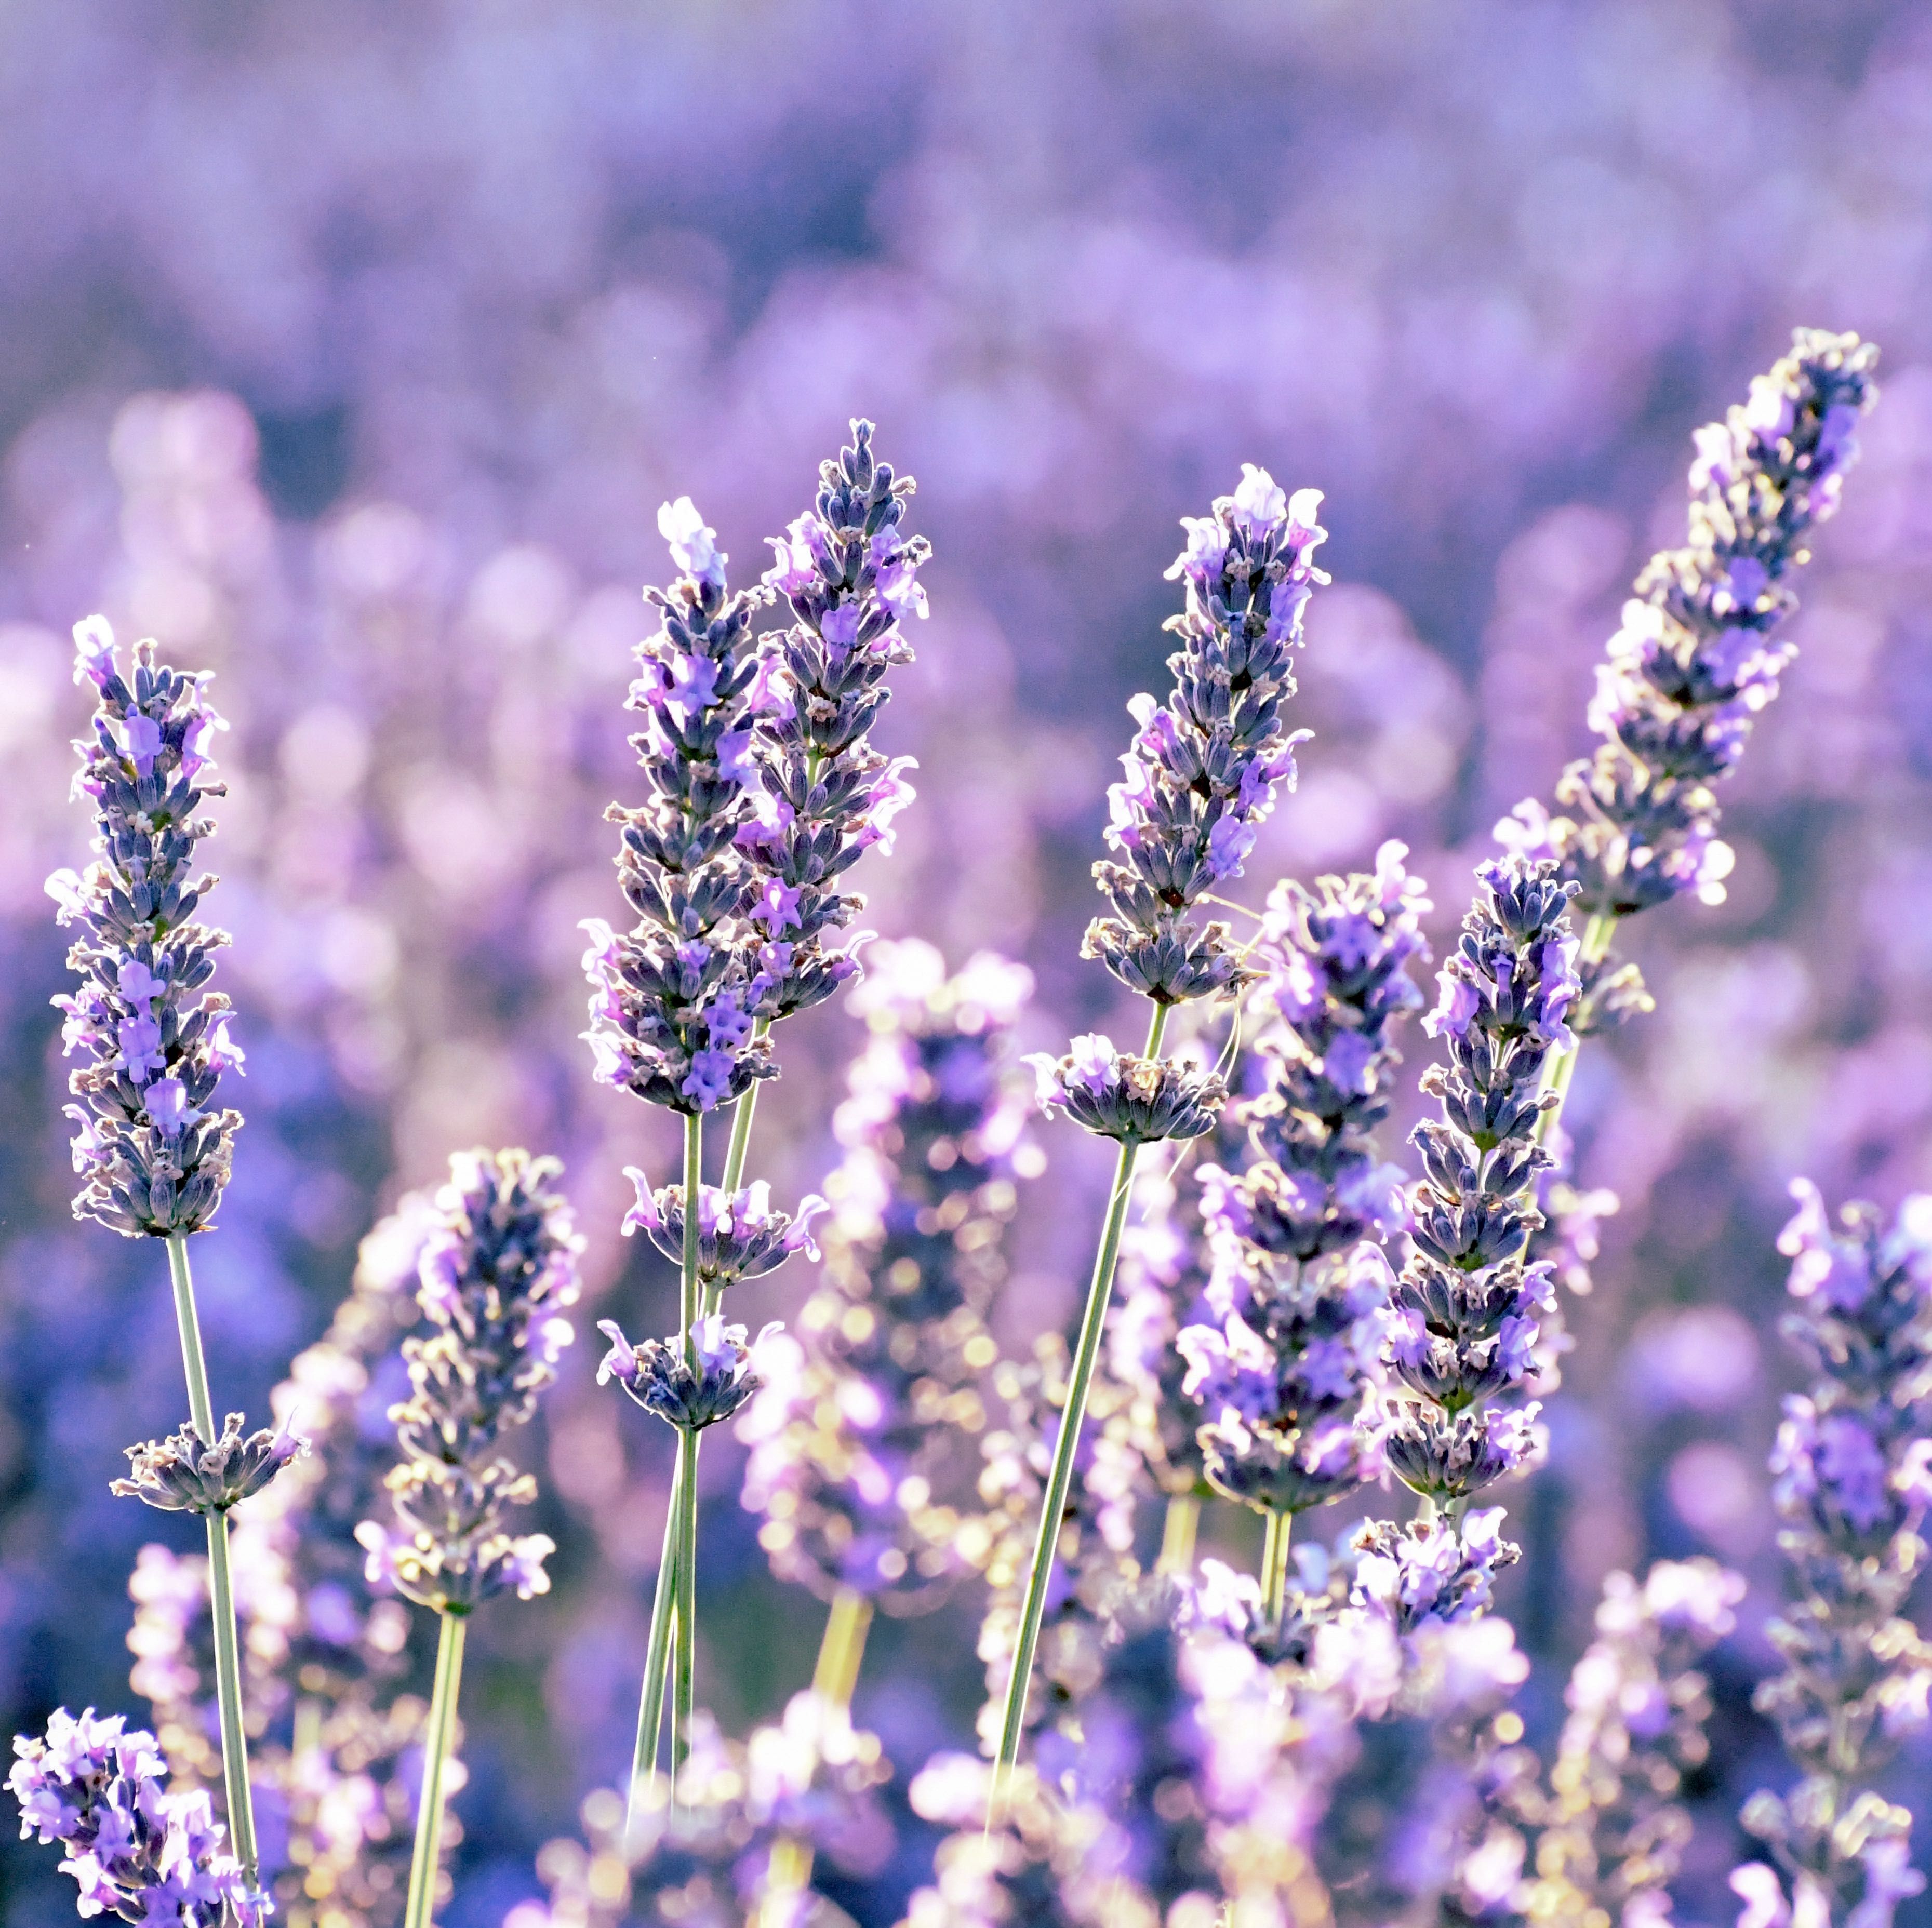 When to plant lavender – for wonderful scent and color